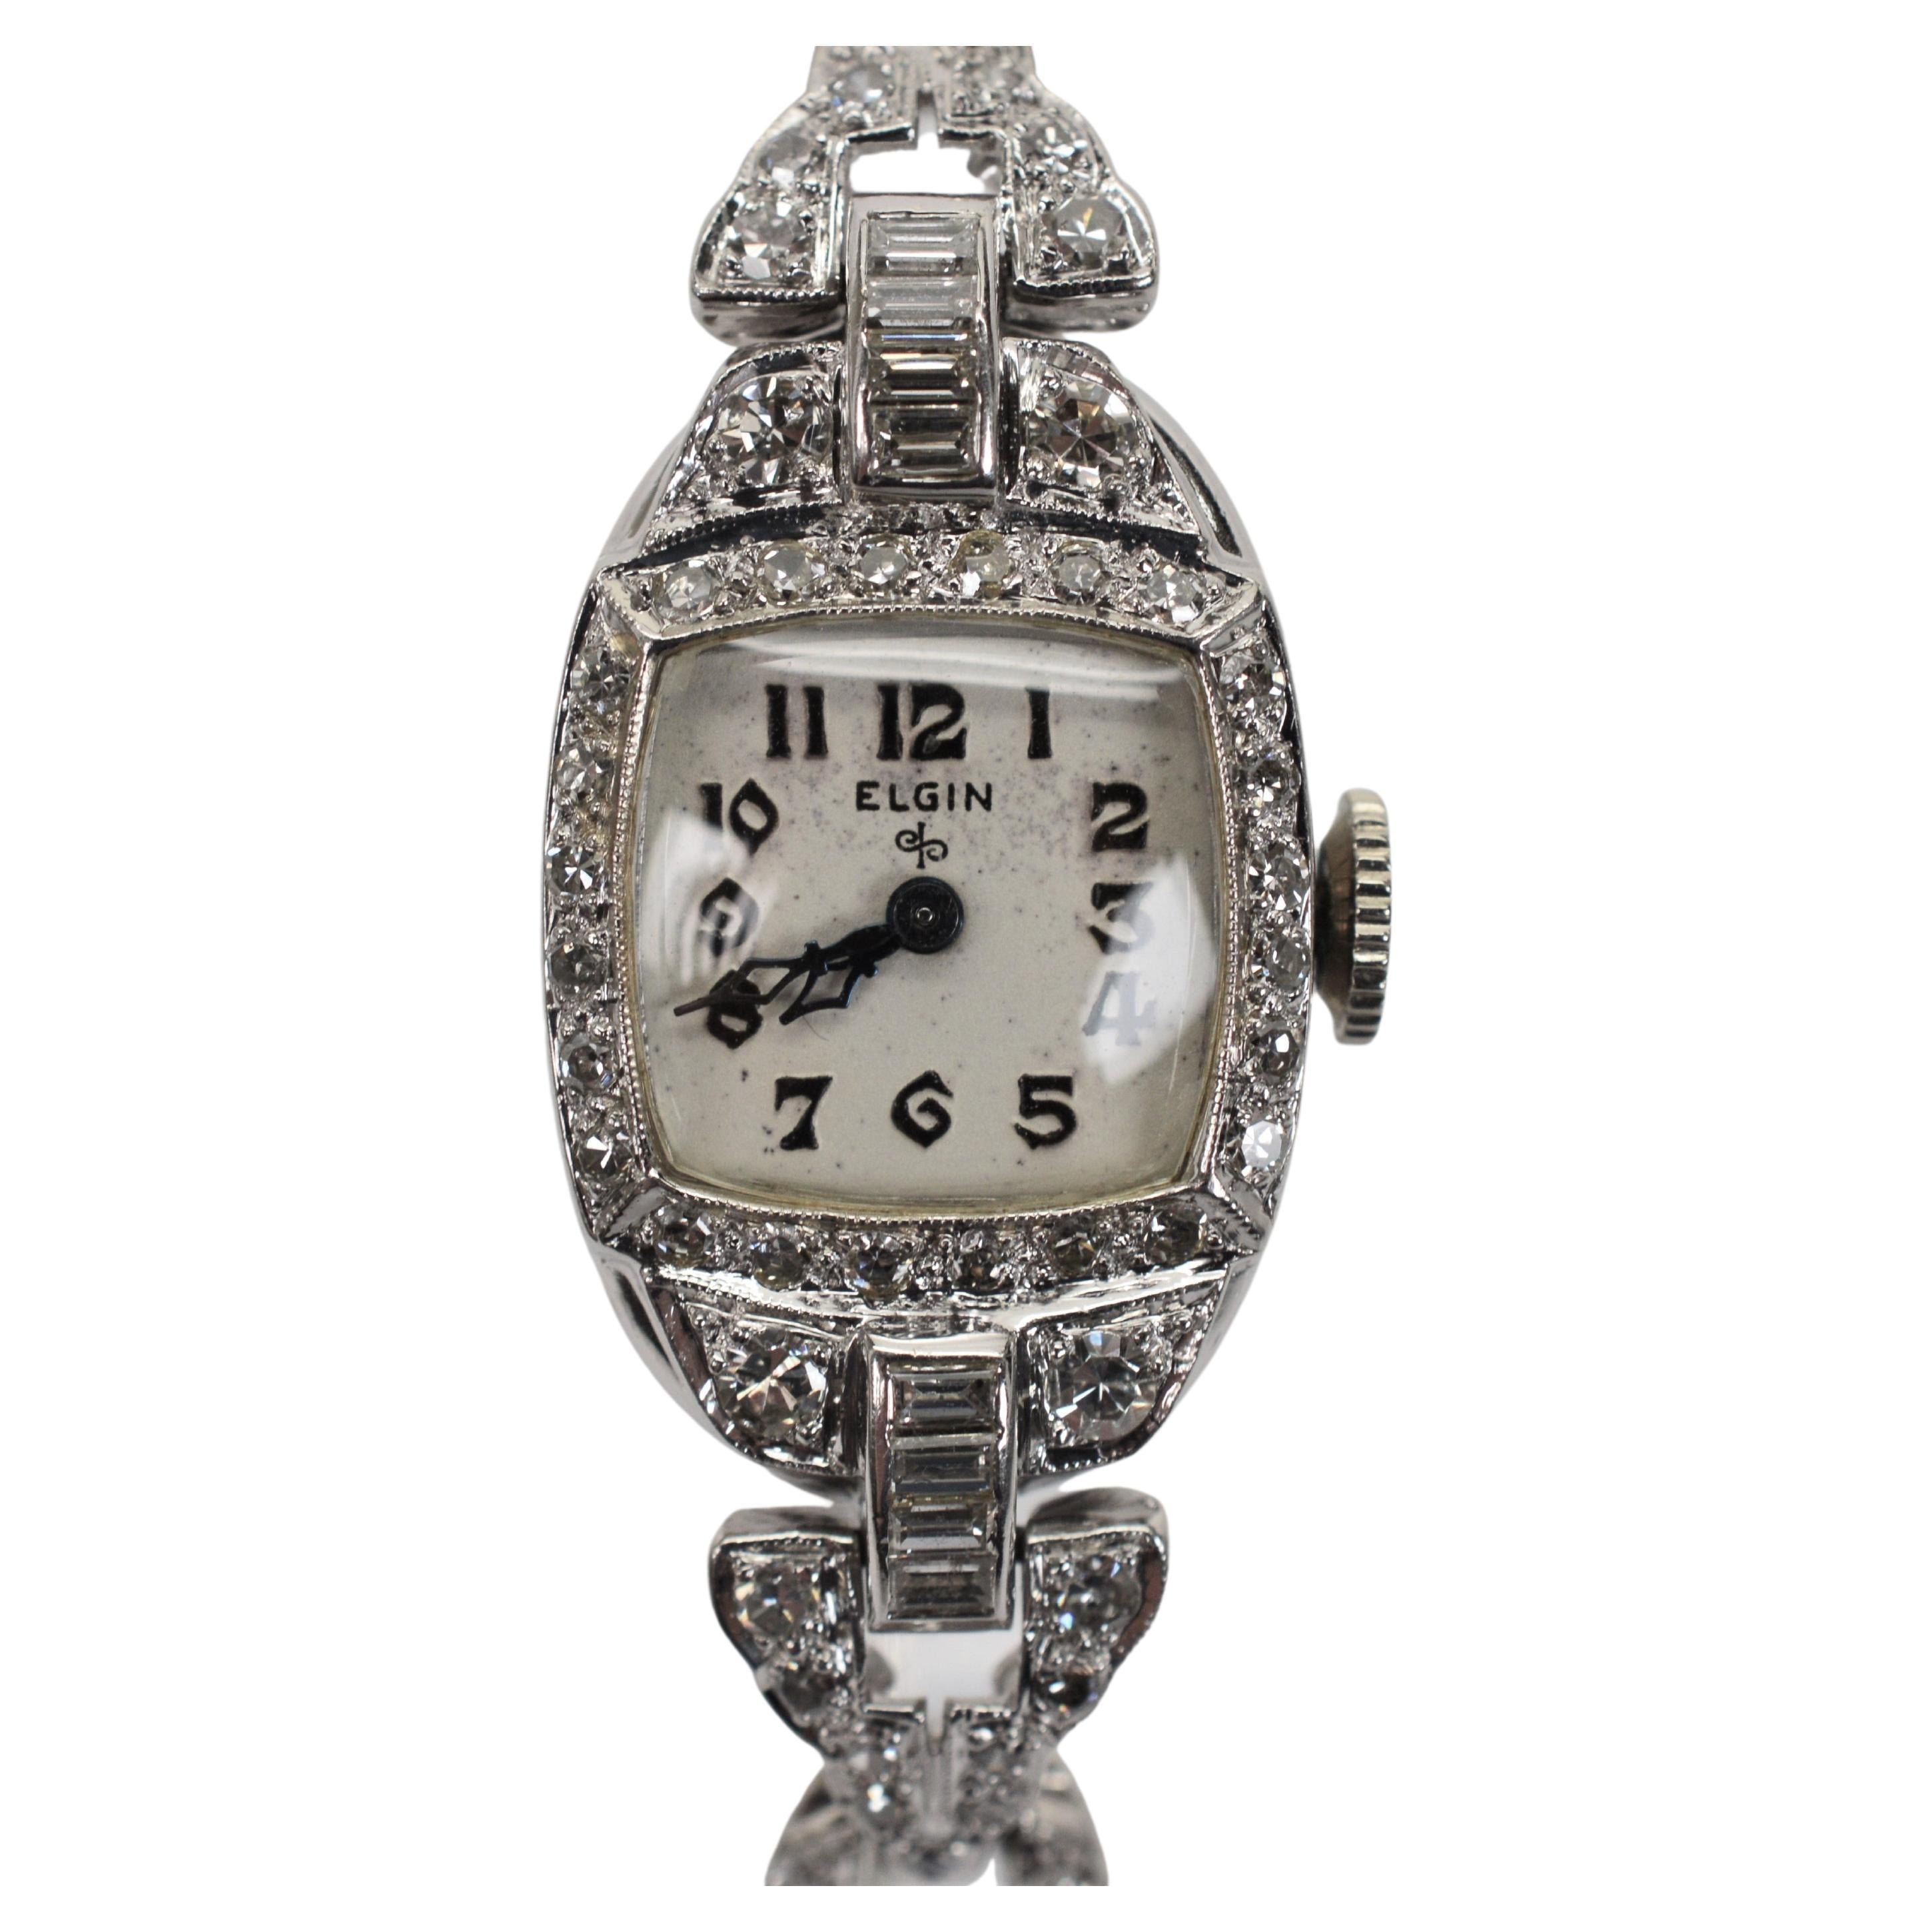 The perfect combination of diamonds and platinum keeps time on this spectacular Art Deco Ladies Wrist Watch by Elgin Watch Co. Dripping with two carats of round faceted diamonds, this elegant ladies dress watch sparkles with over 140 fine white